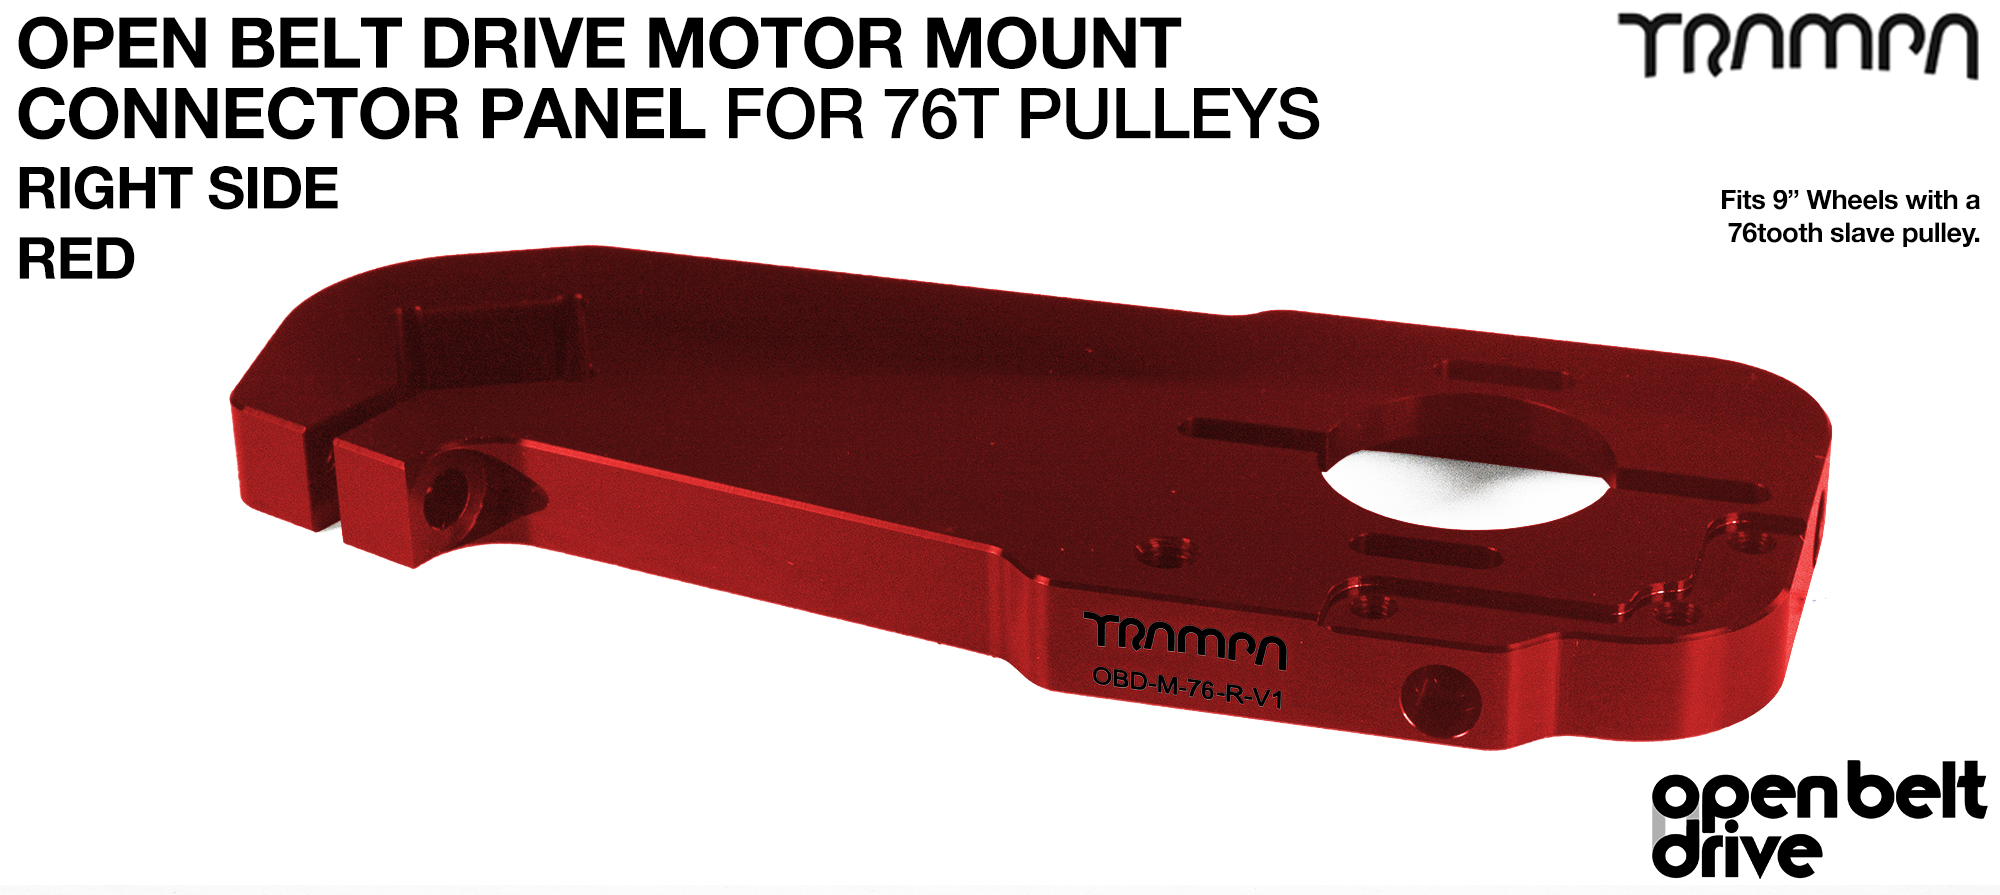 OBD Motor Mount Connector Panel for 76 tooth Pulleys - GOOFY - RED